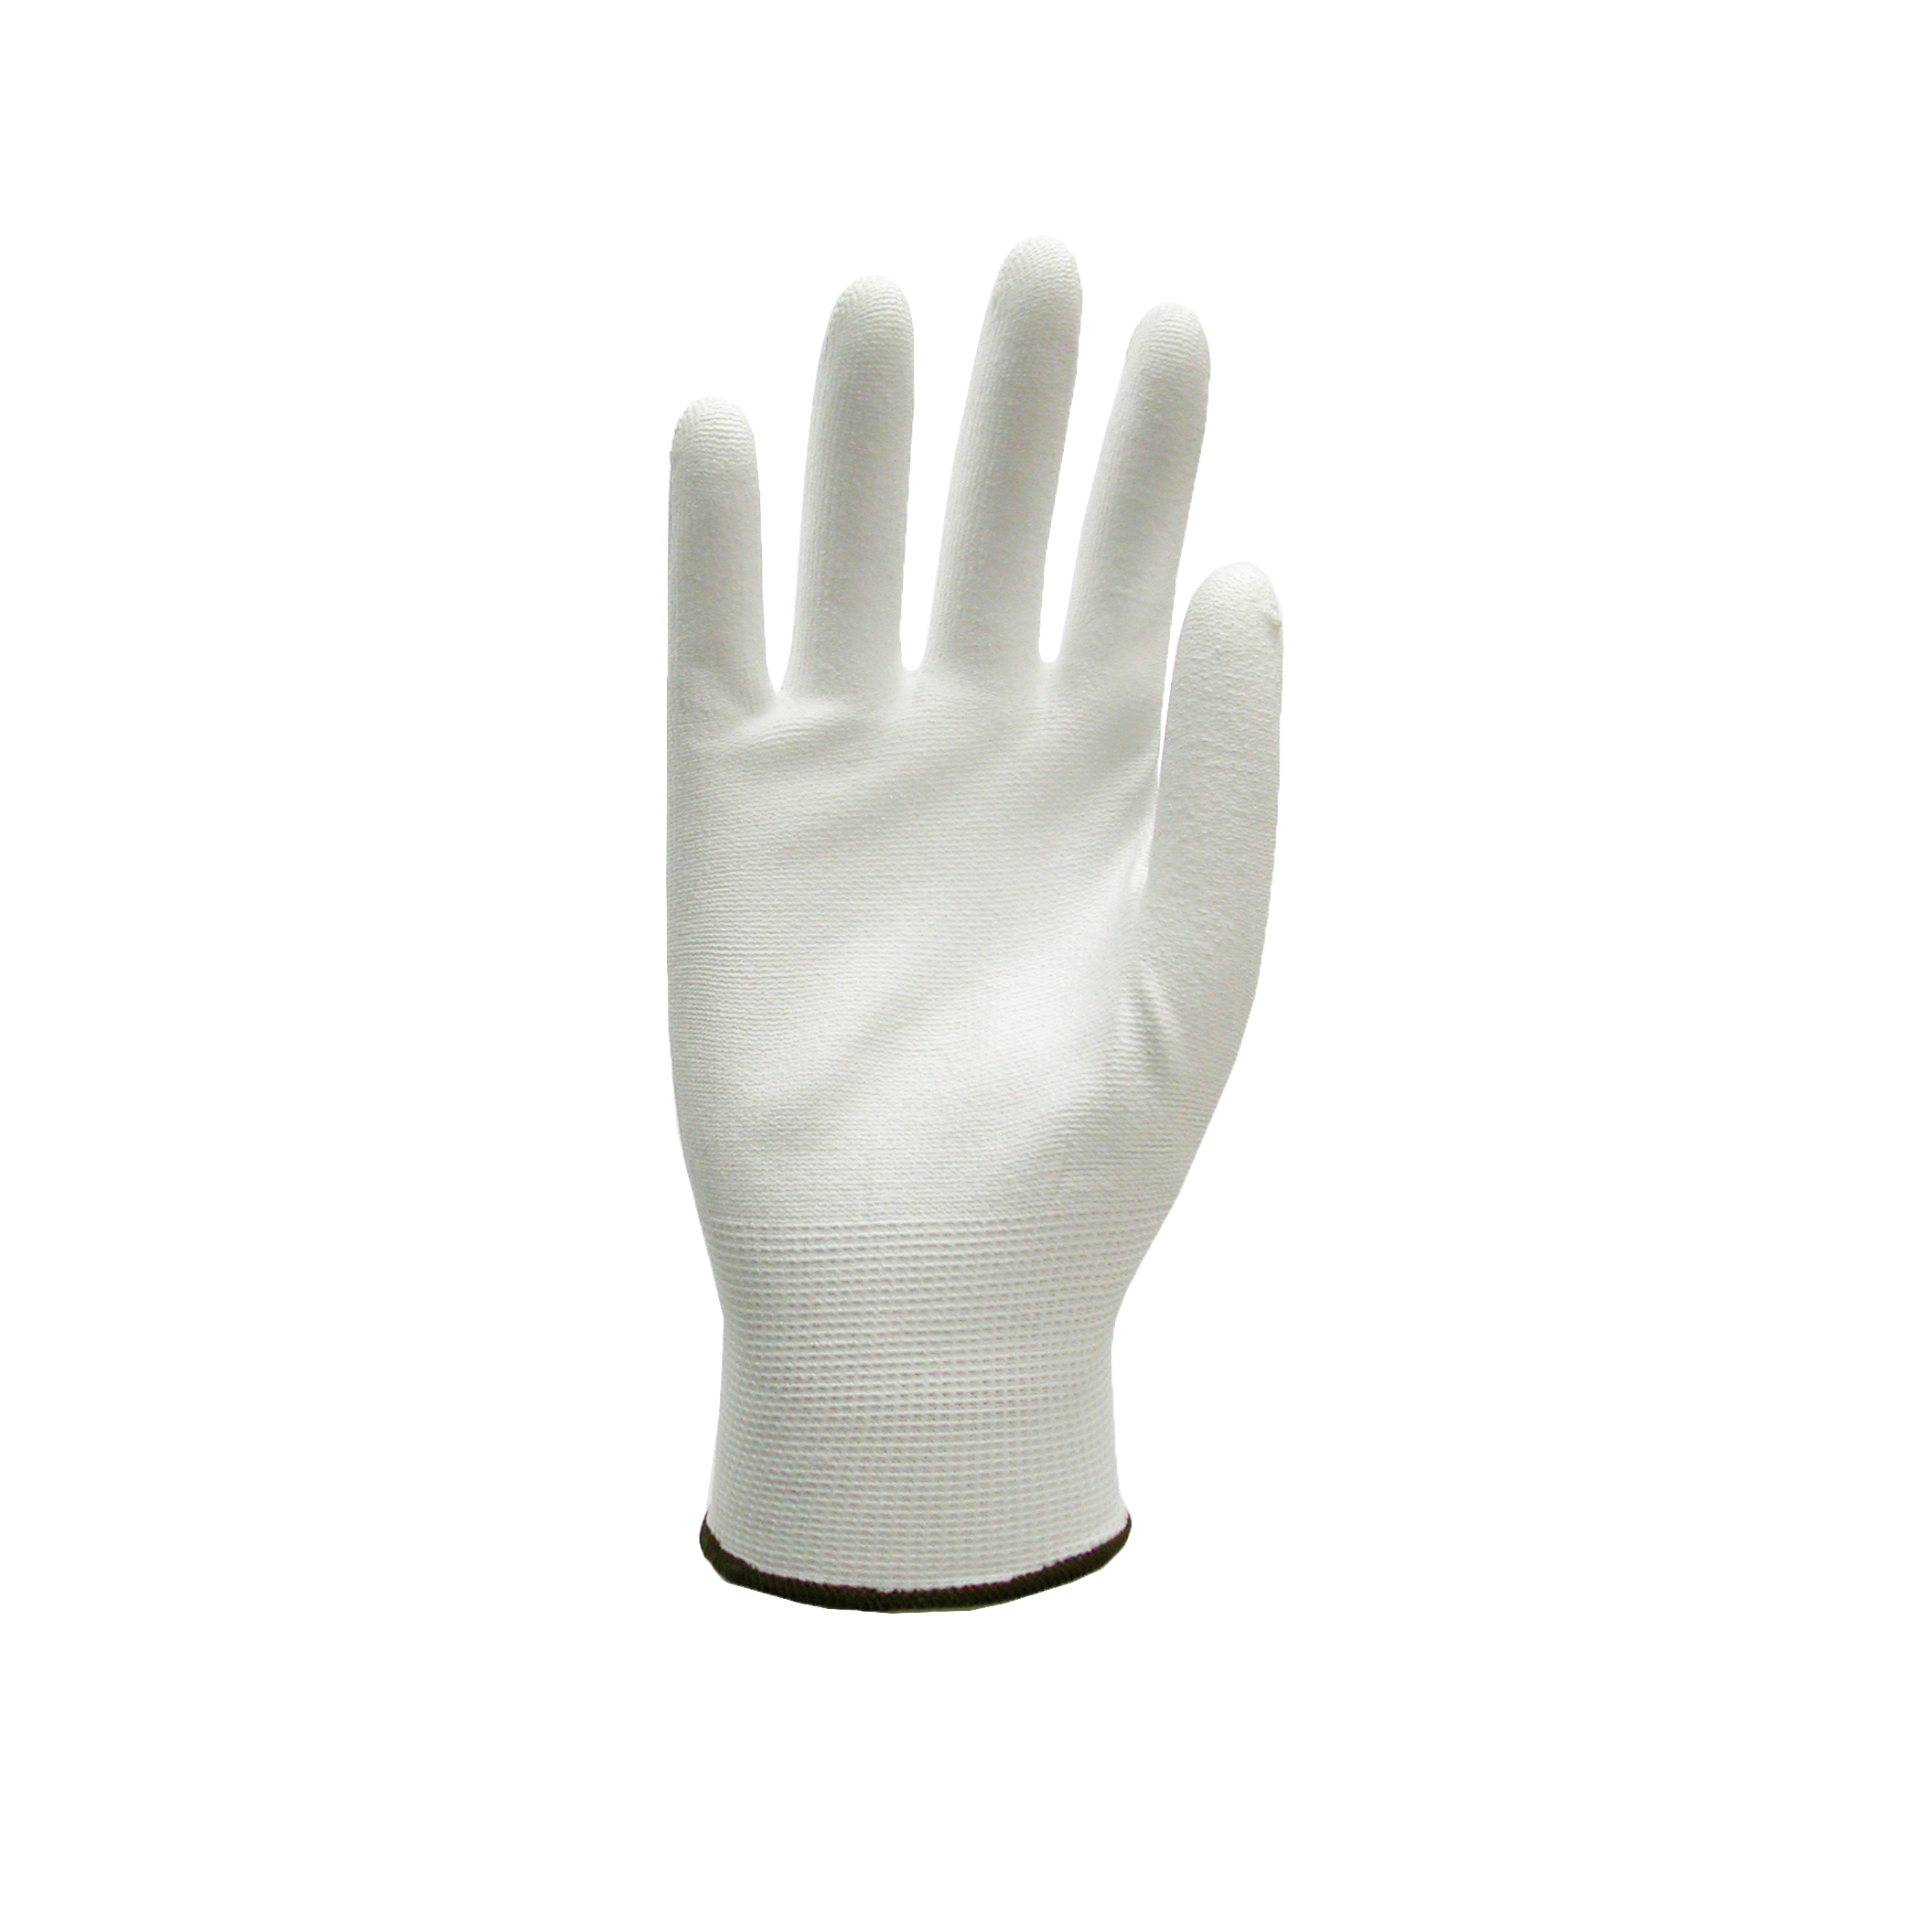 Hand Polyurethane Safetyware Gloves Protection - Coated